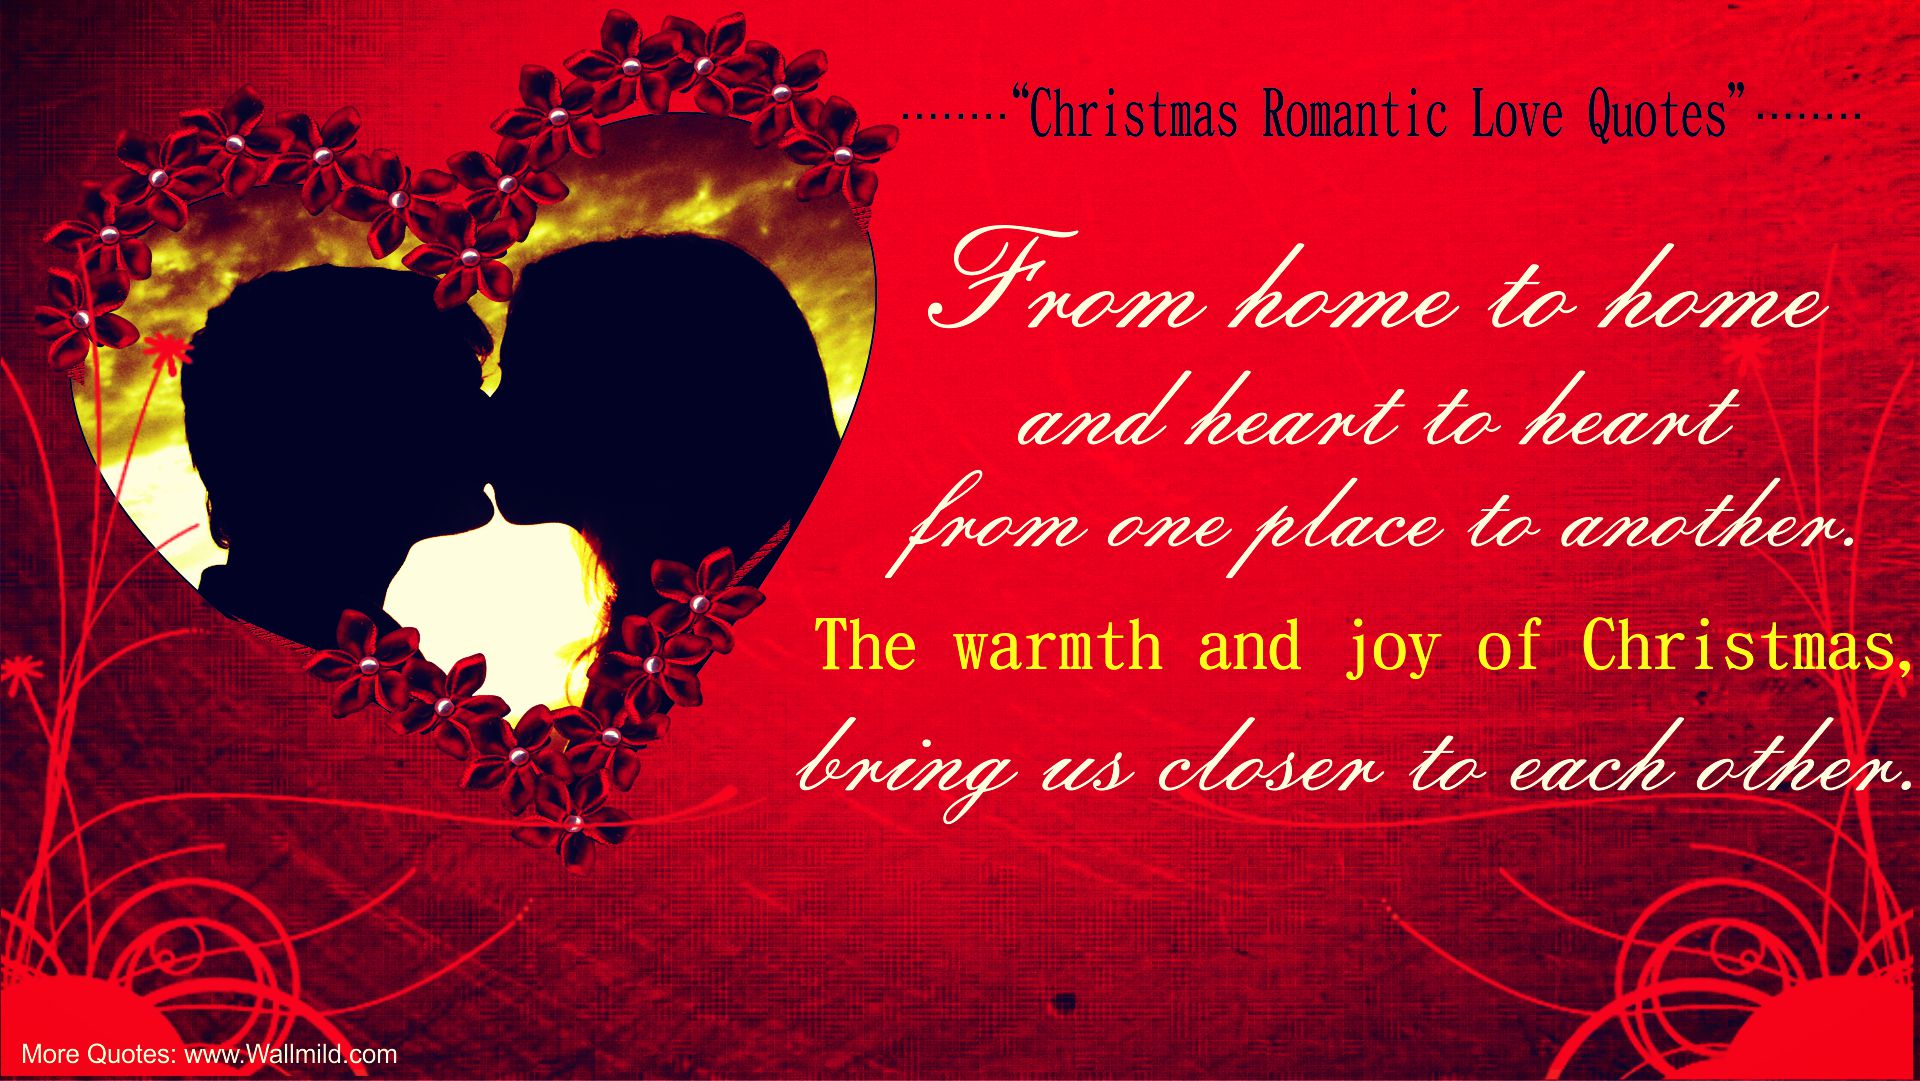 Christmas Love Quotes Wallpaper Free Download Is High - Long Distance  Christmas Love Quotes - 1920x1081 Wallpaper 